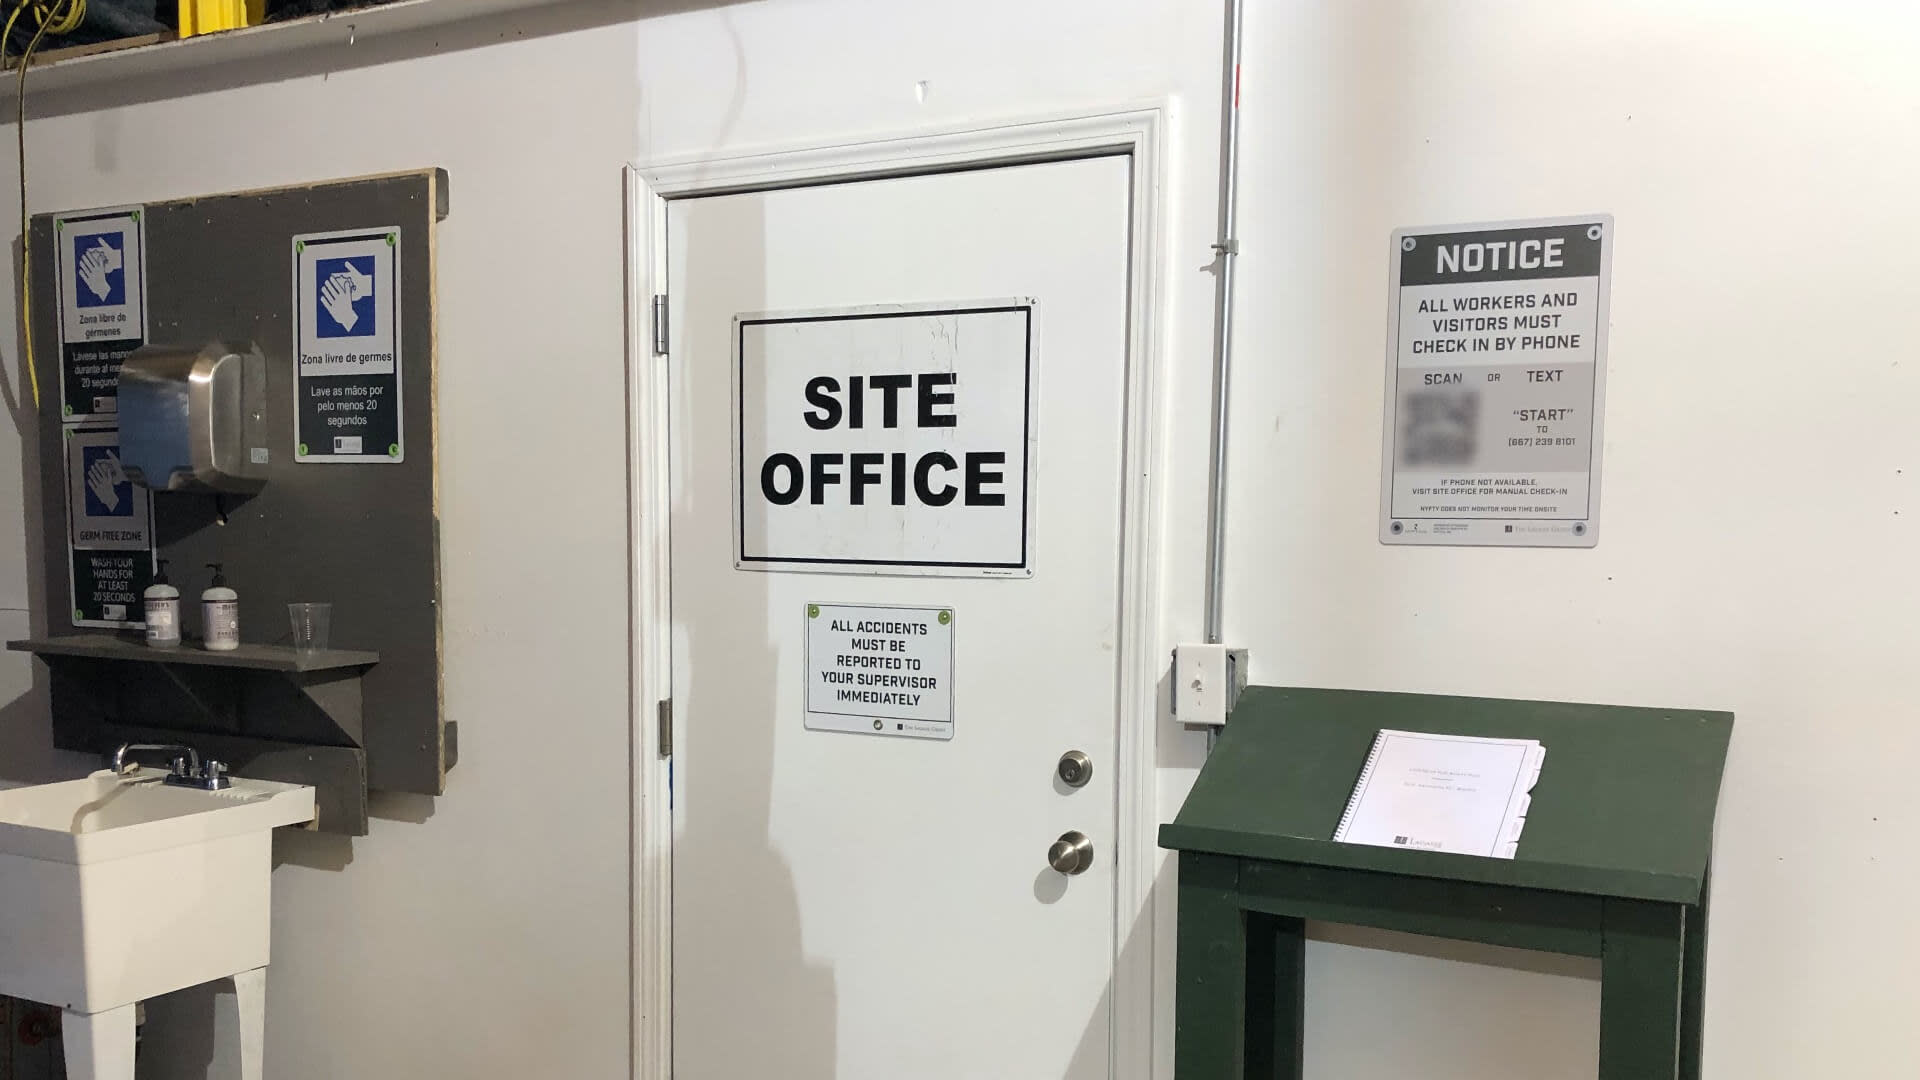 Doorway to site office with COVID-19 safety signs posted